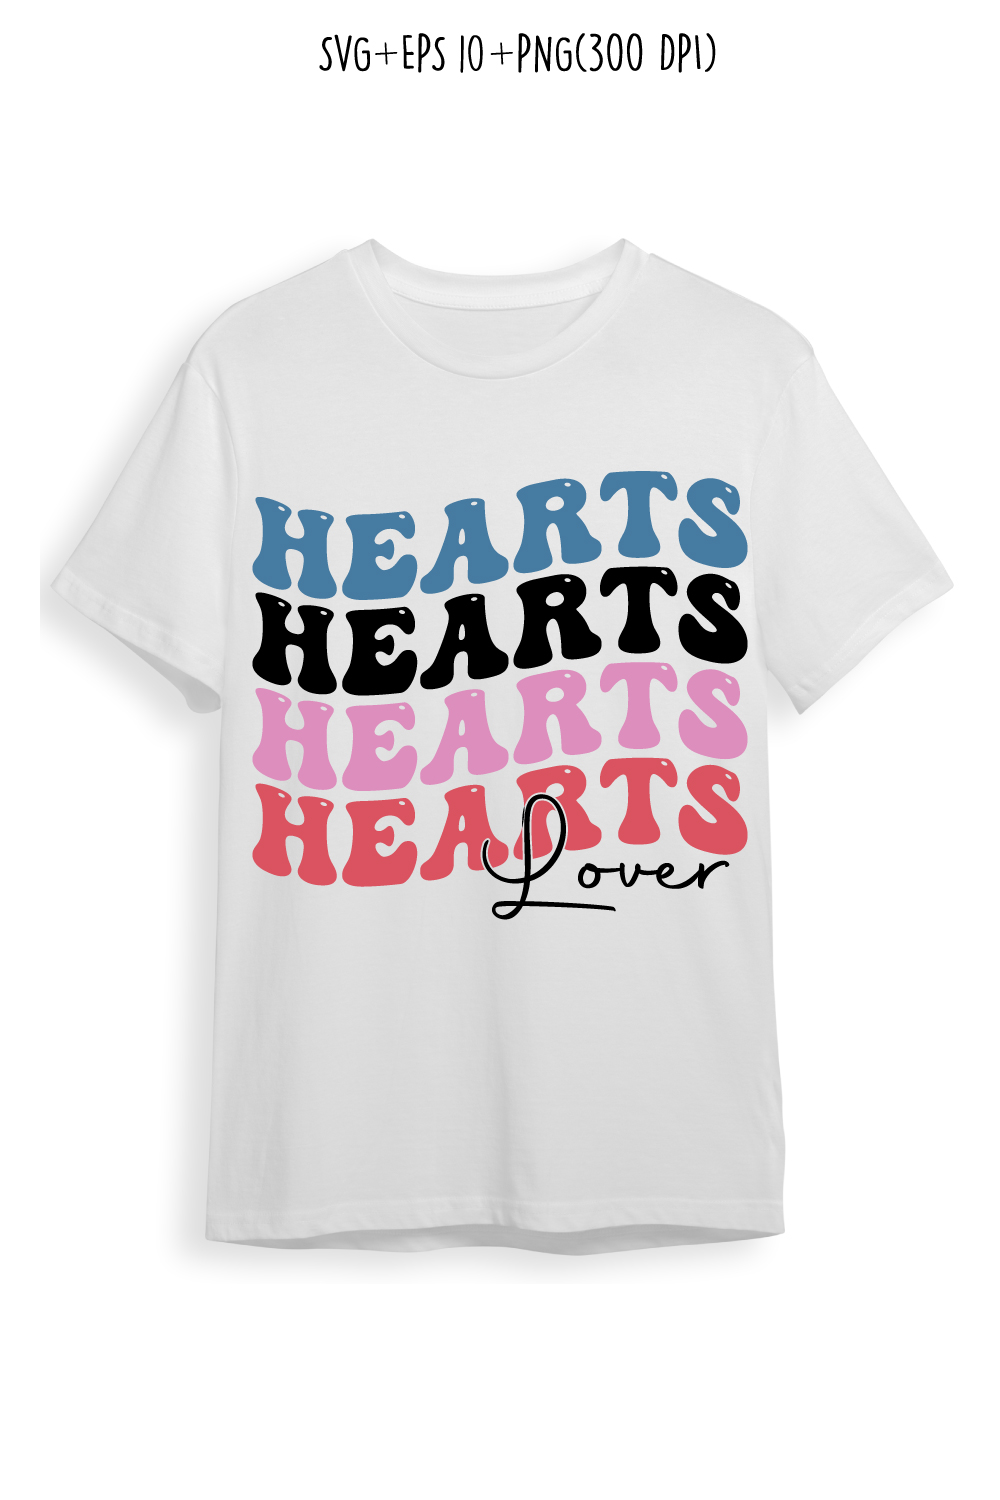 Hearts lover indoor game retro typography design for t-shirts, cards, frame artwork, phone cases, bags, mugs, stickers, tumblers, print, etc pinterest preview image.